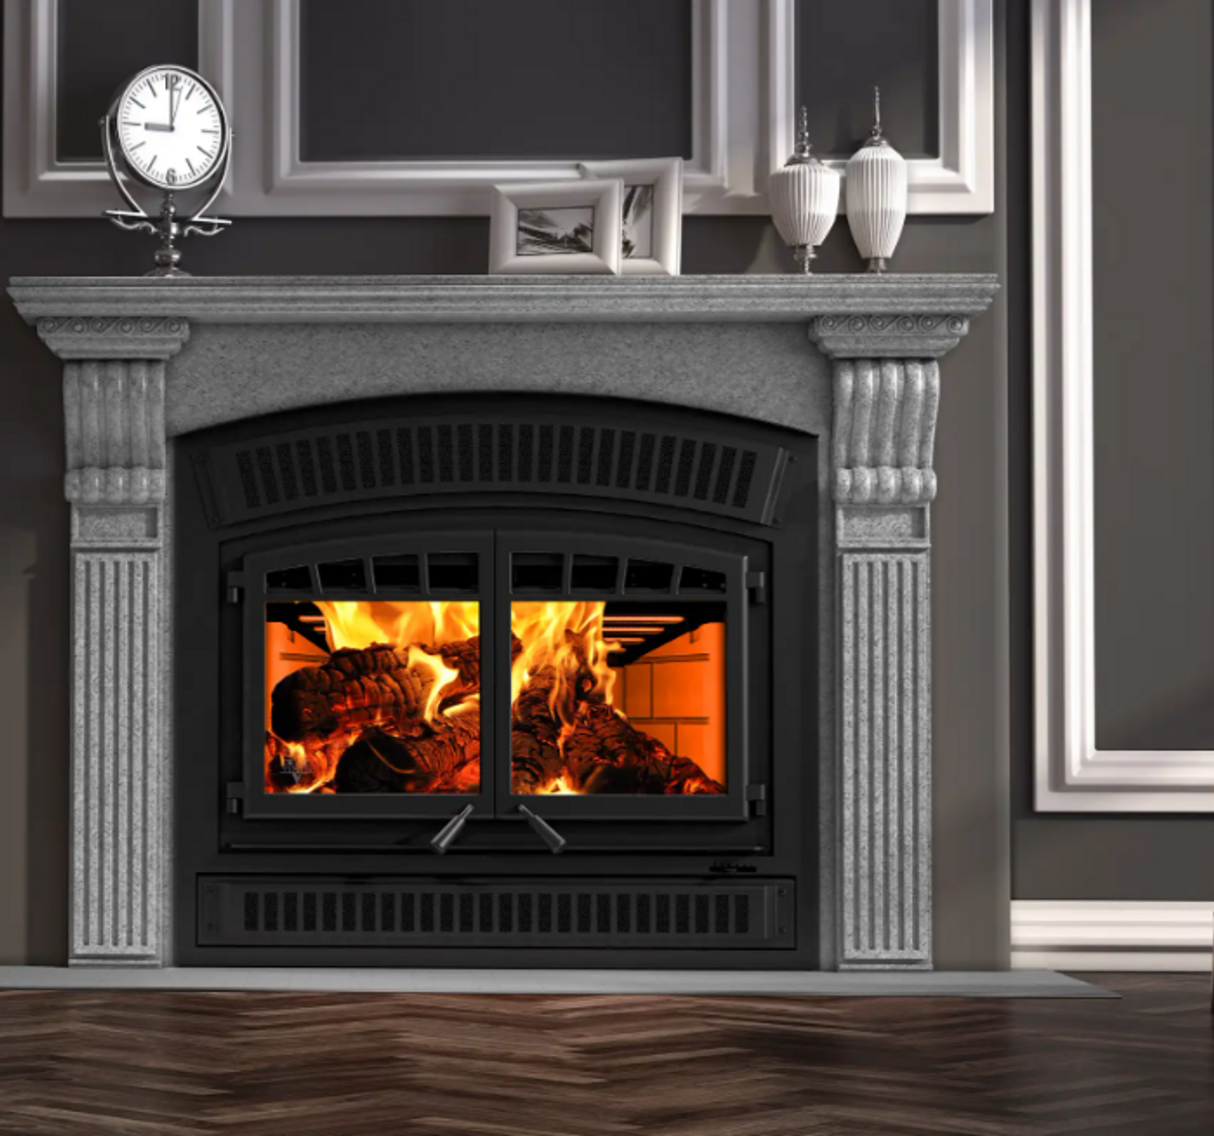 Ventis HE350 ZC Wood Fireplace with Blower